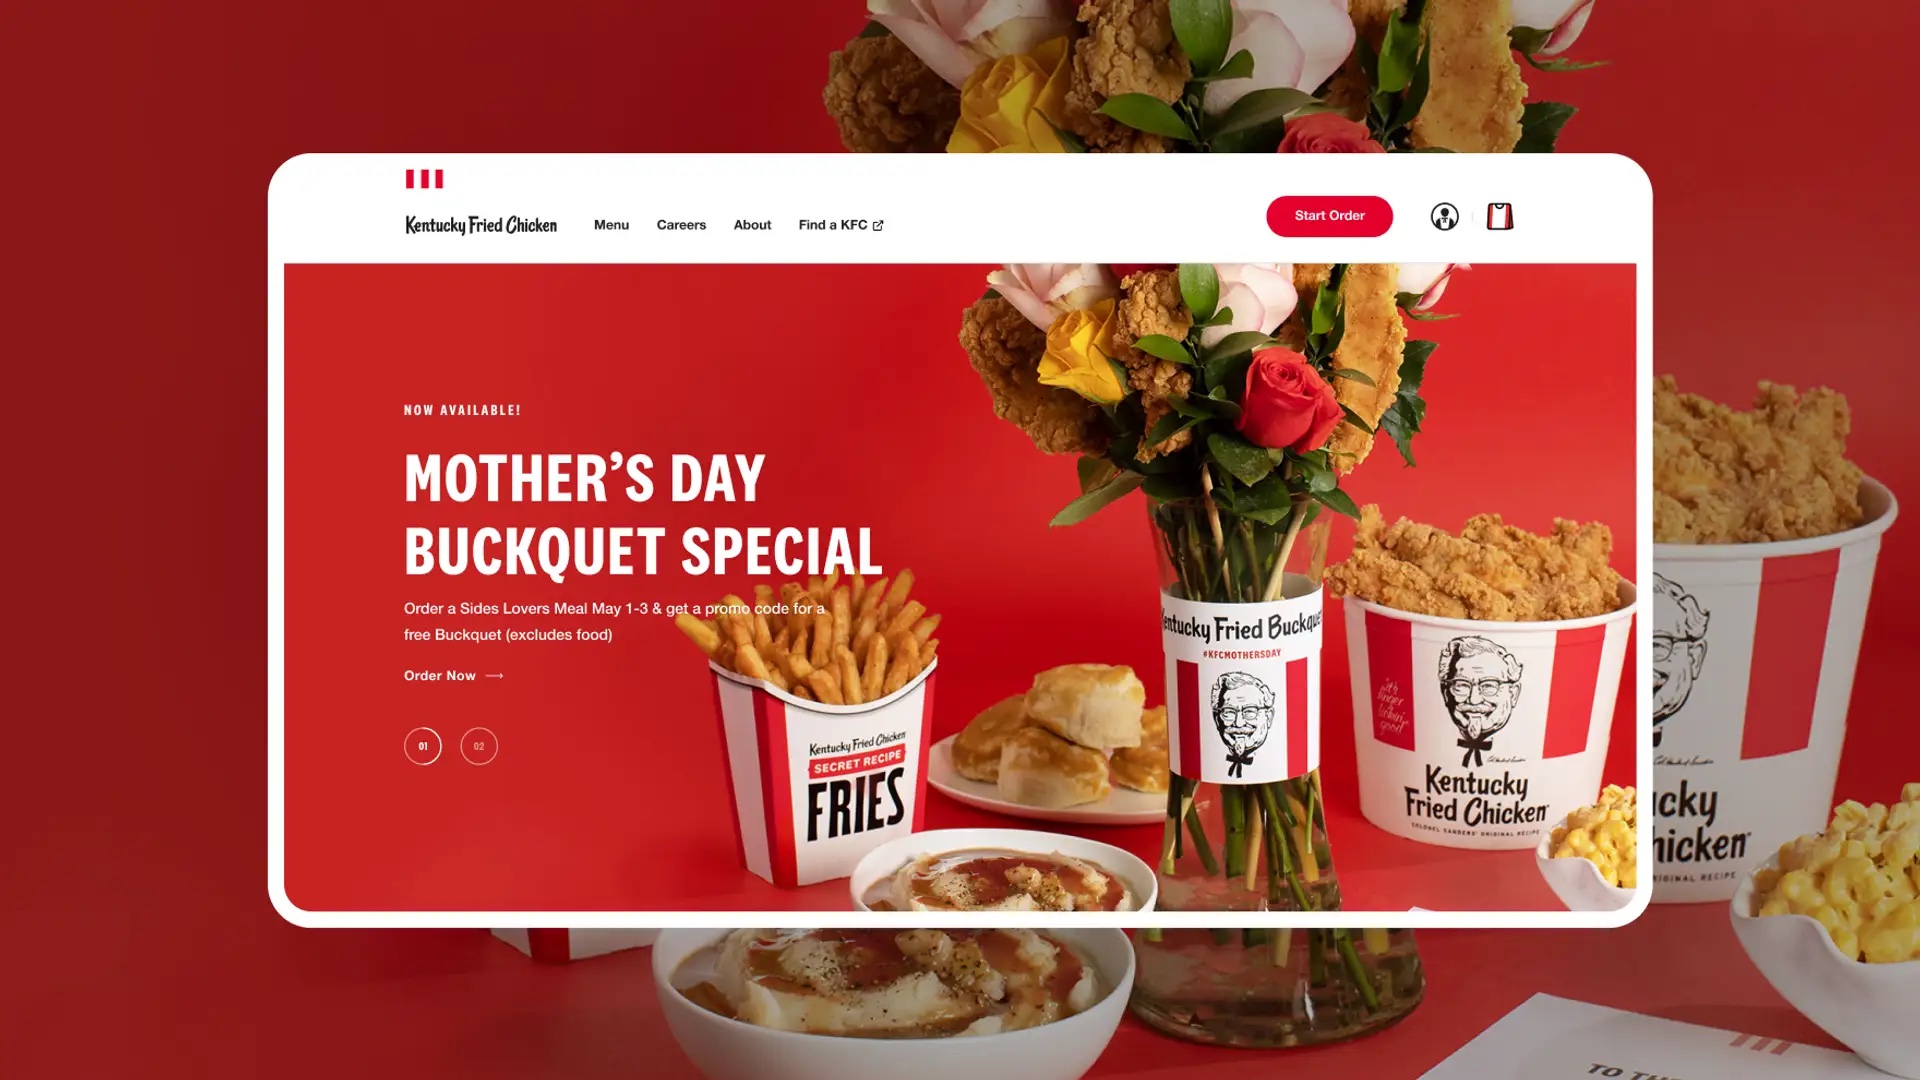 Our campaign with KFC combined flower bouquets and buckets of fried chicken.